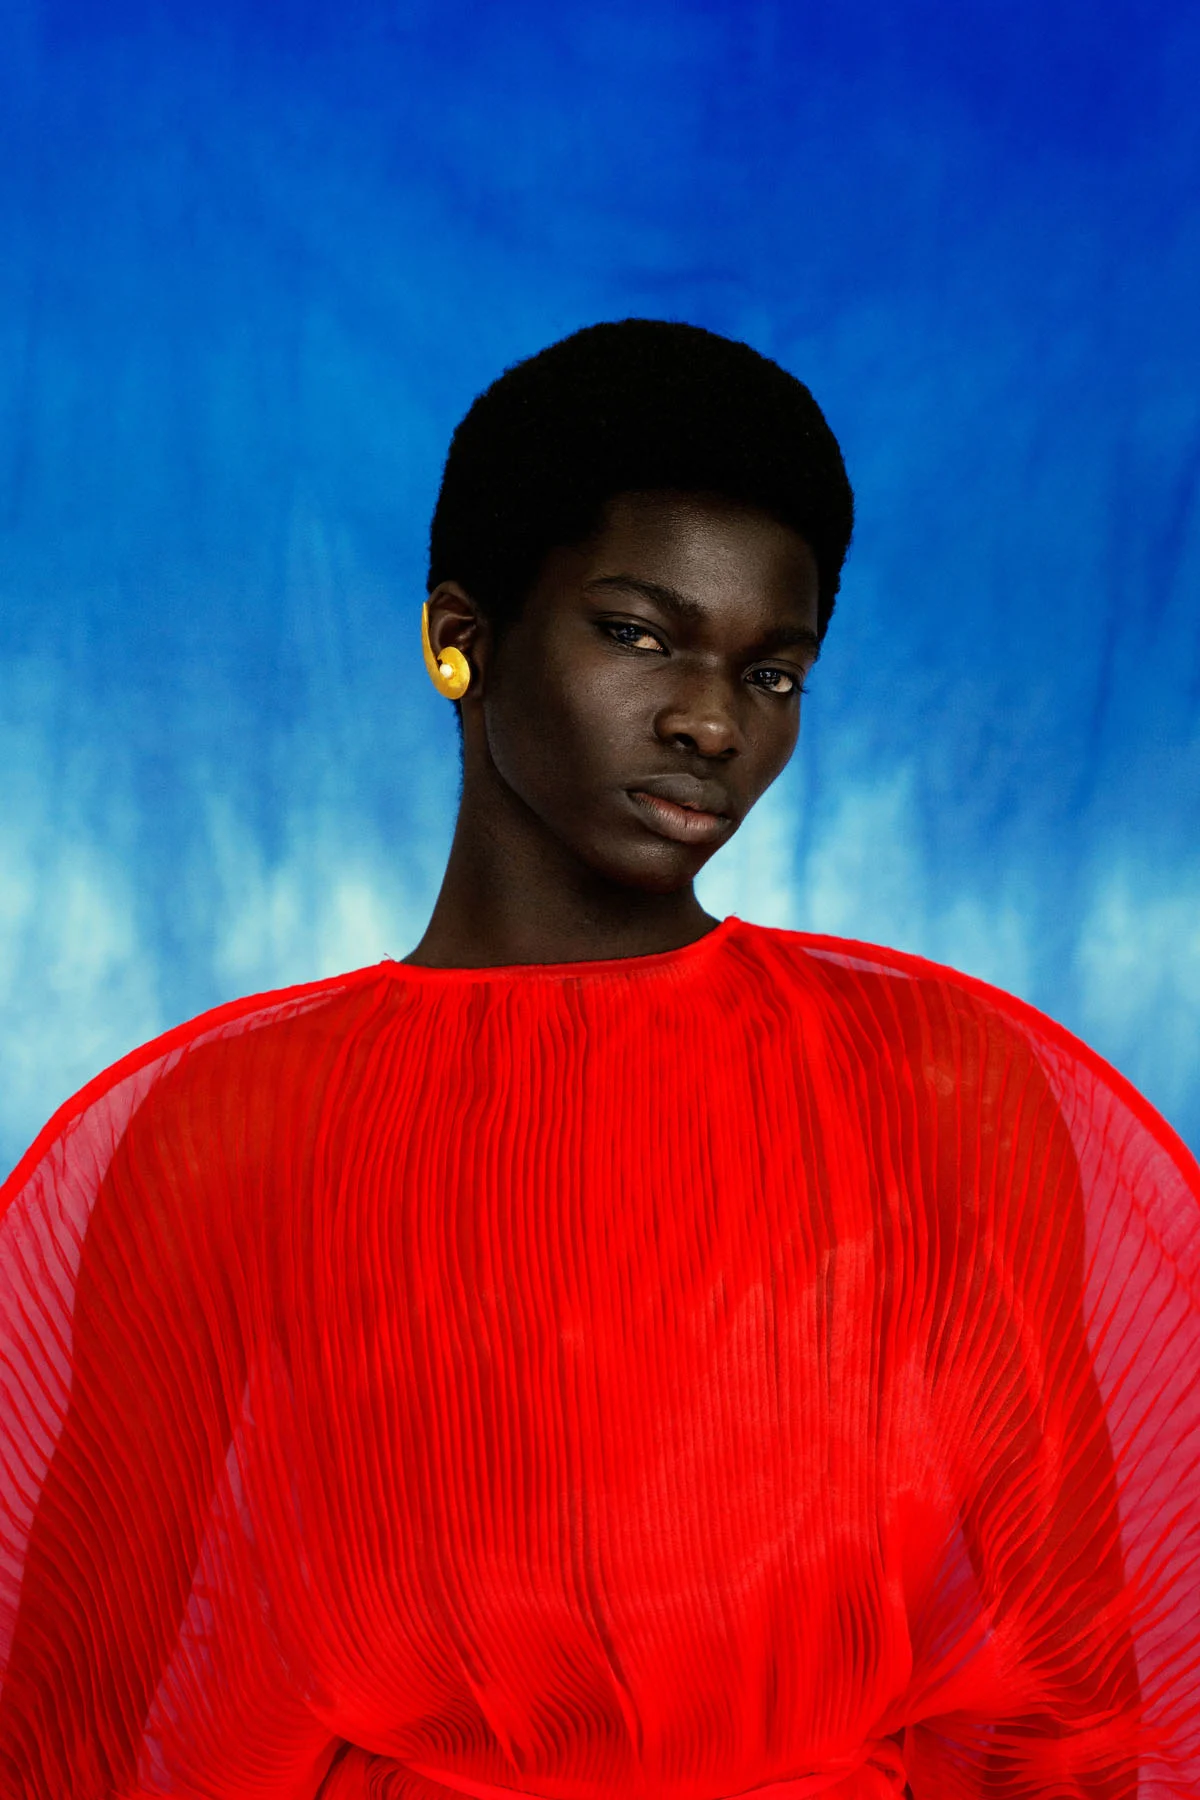 A photographic portrait of a male model wearing a fiery red pleated see-through blouse and gold earring, standing in front of a royal blue-white gradient backdrop and facing the camera.
